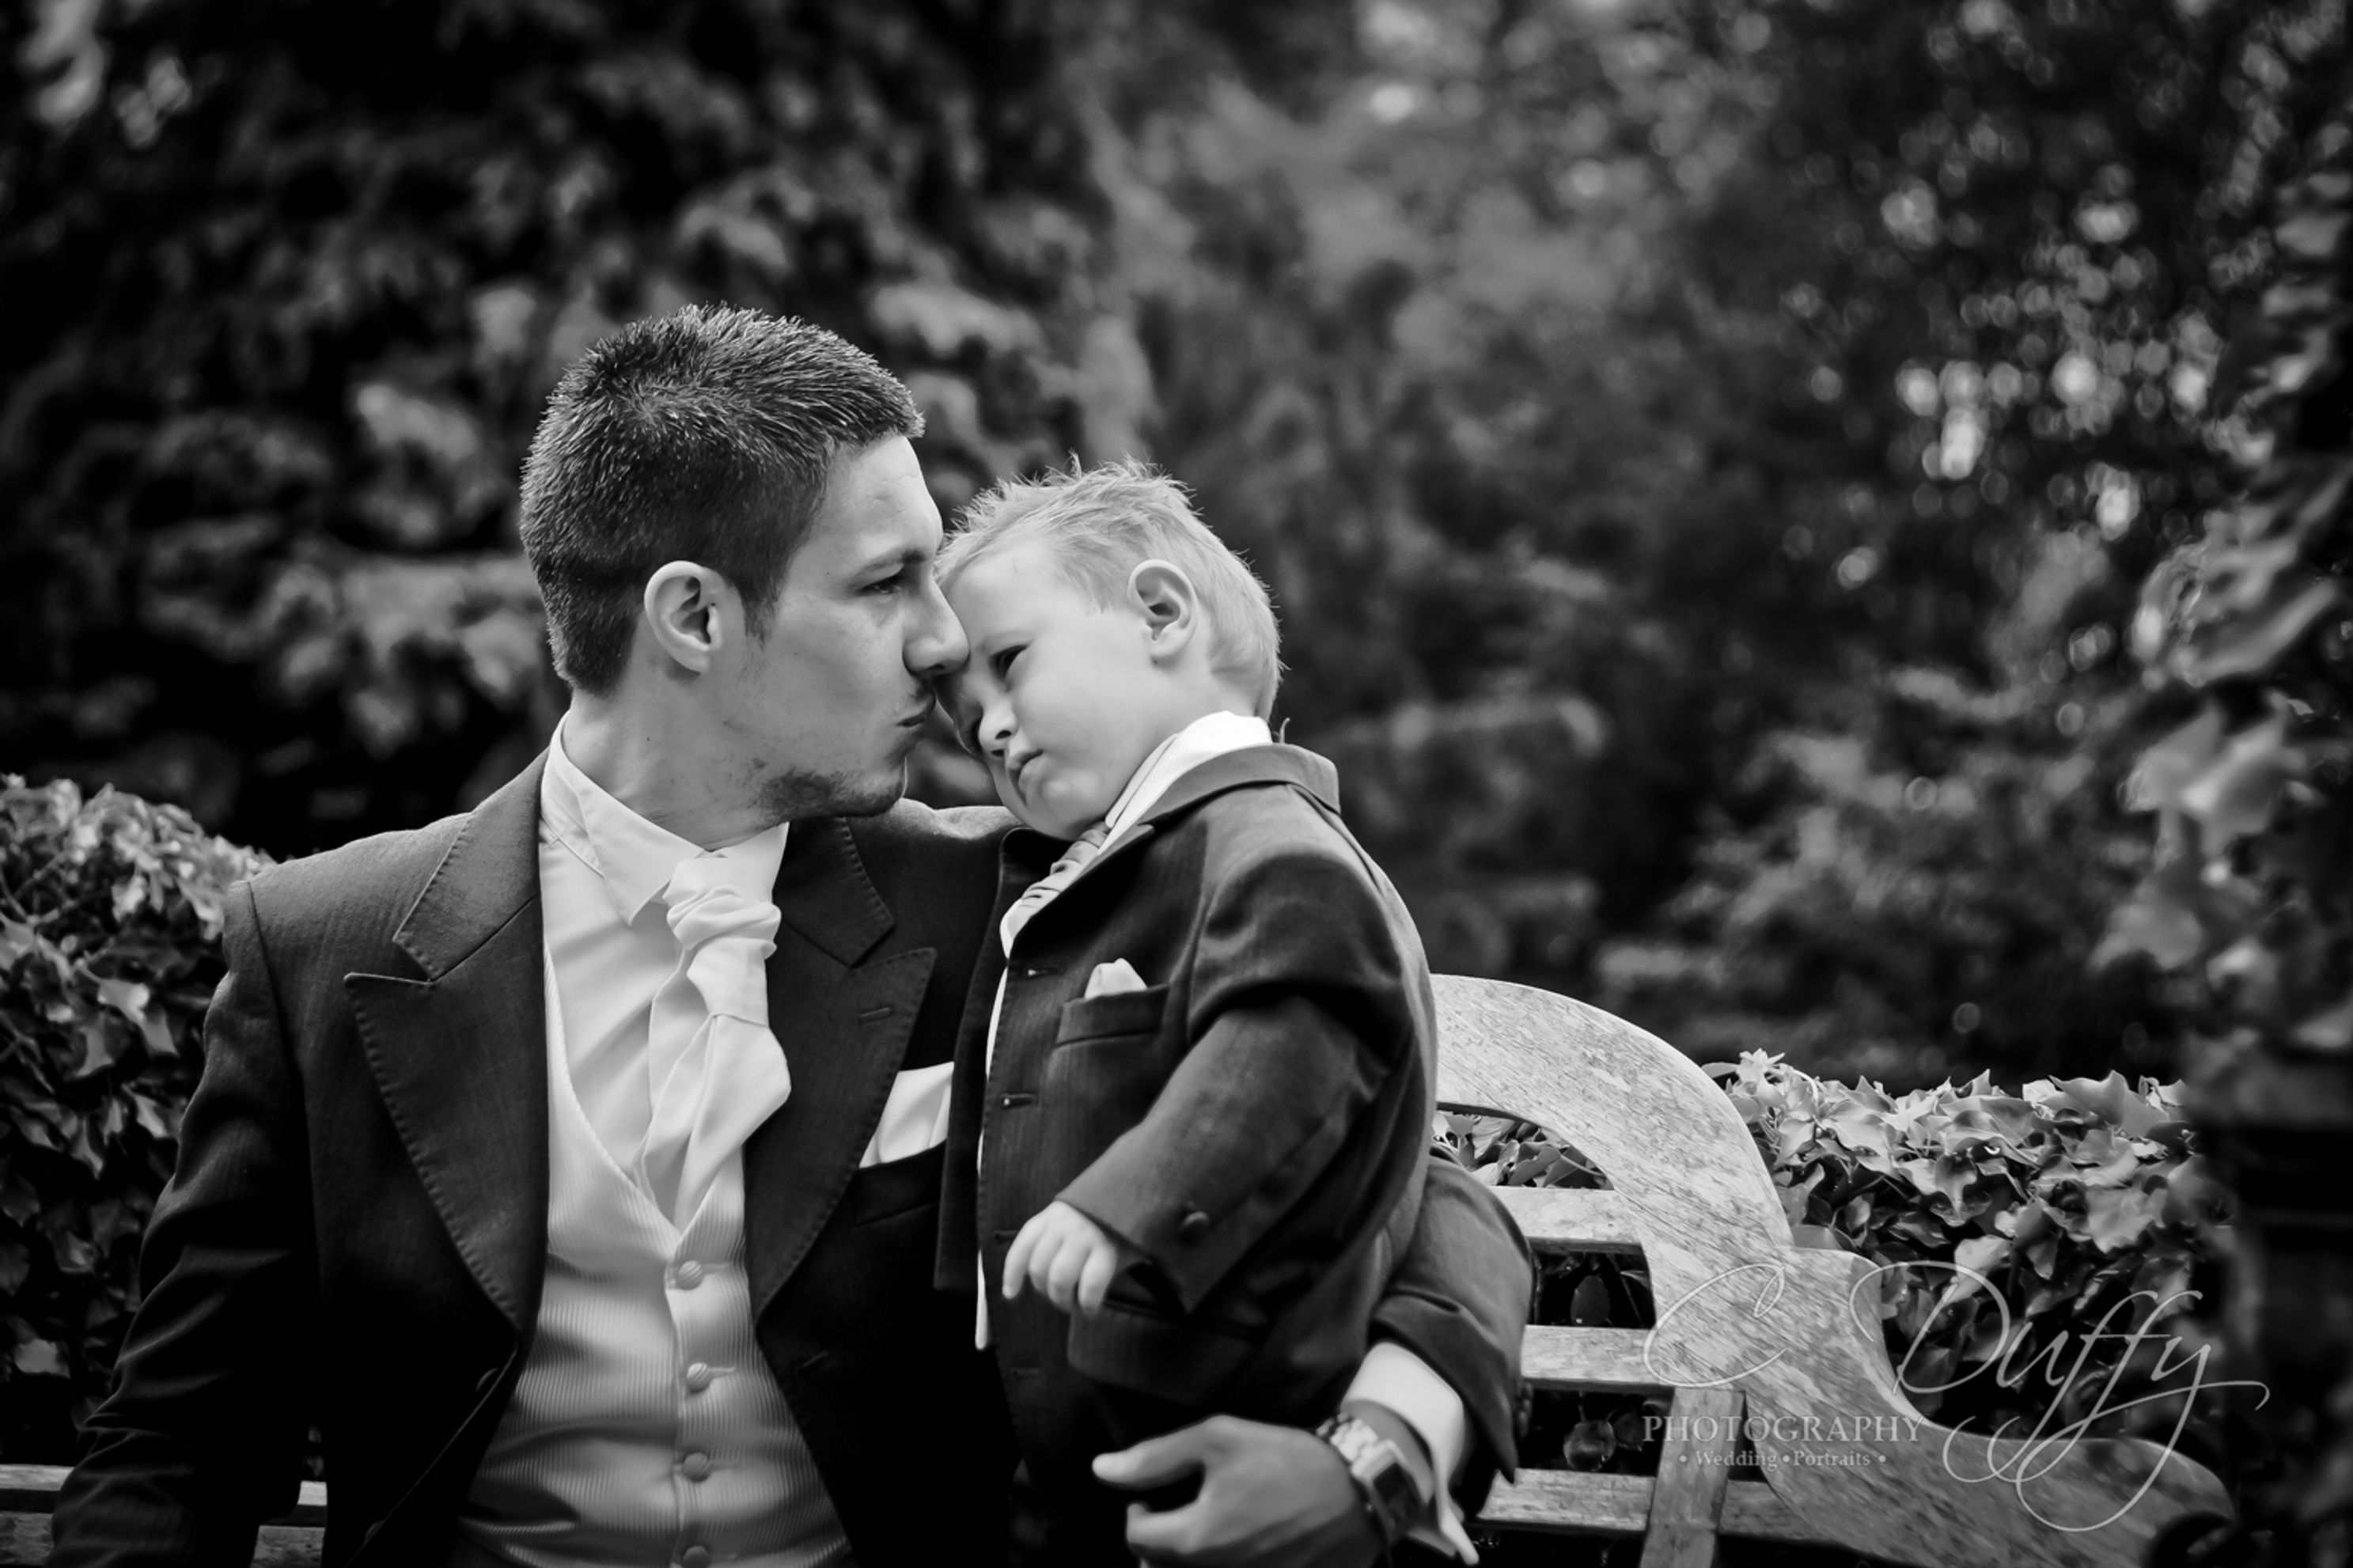 Father and son tender moment at wedding